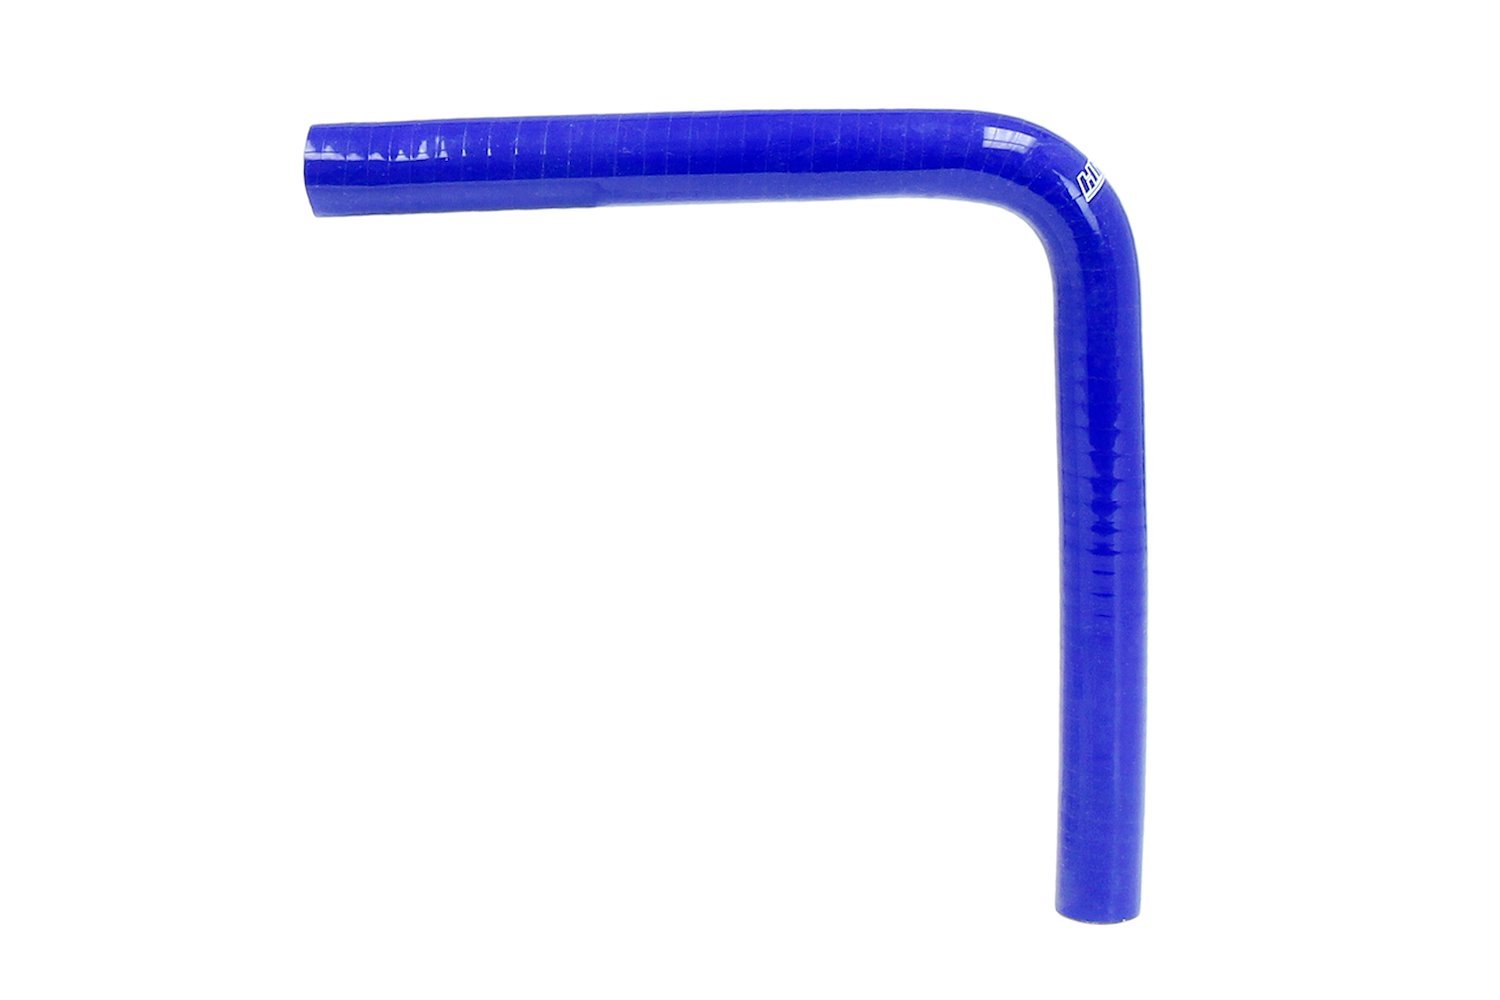 HTSEC90-118-BLUE Silicone 90-Degree Elbow Coupler Hose, High-Temp 4-Ply Reinforced, 1-3/16 in. ID, Blue